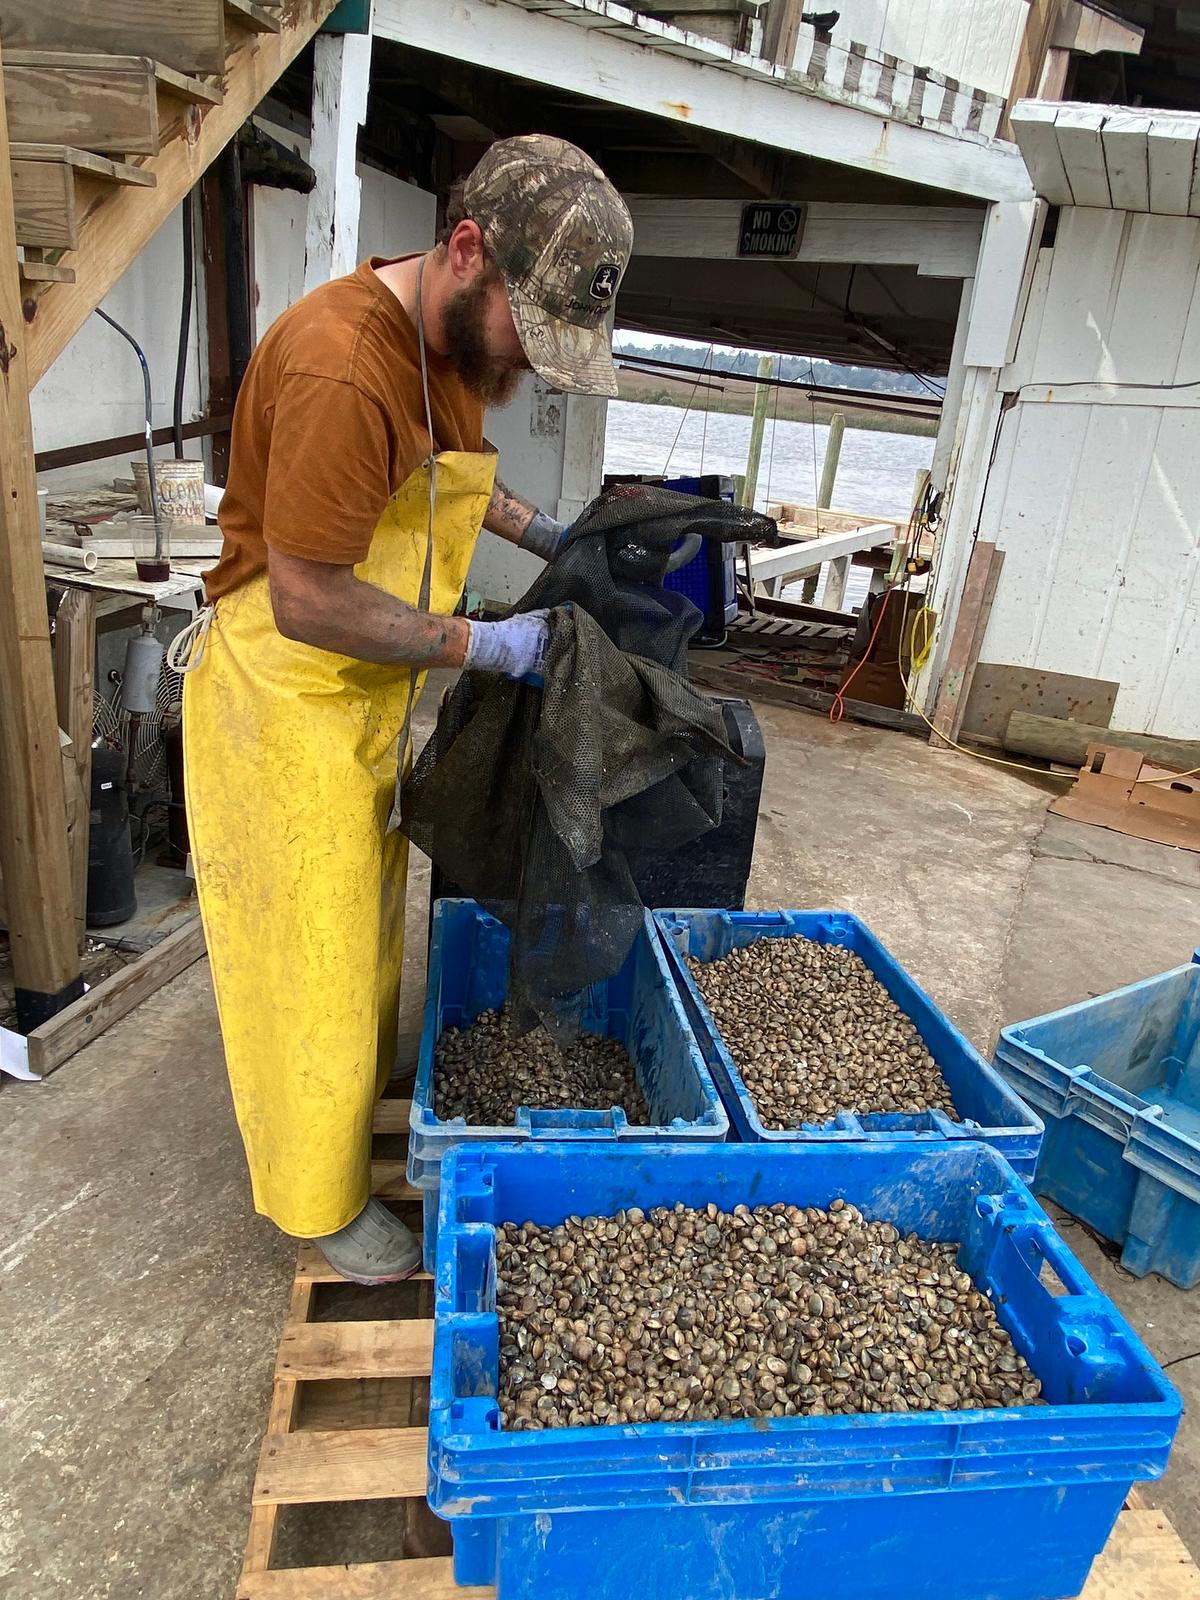 Fishing operations like Sapelo Sea Farms, which grows clams and harvests wild oysters in nearby waters, operates along the docks of the Sapelo River in Townsend, 14 miles north of Darien, Georgia. (Ligaya Figueras/The Atlanta Journal-Constitution/TNS)